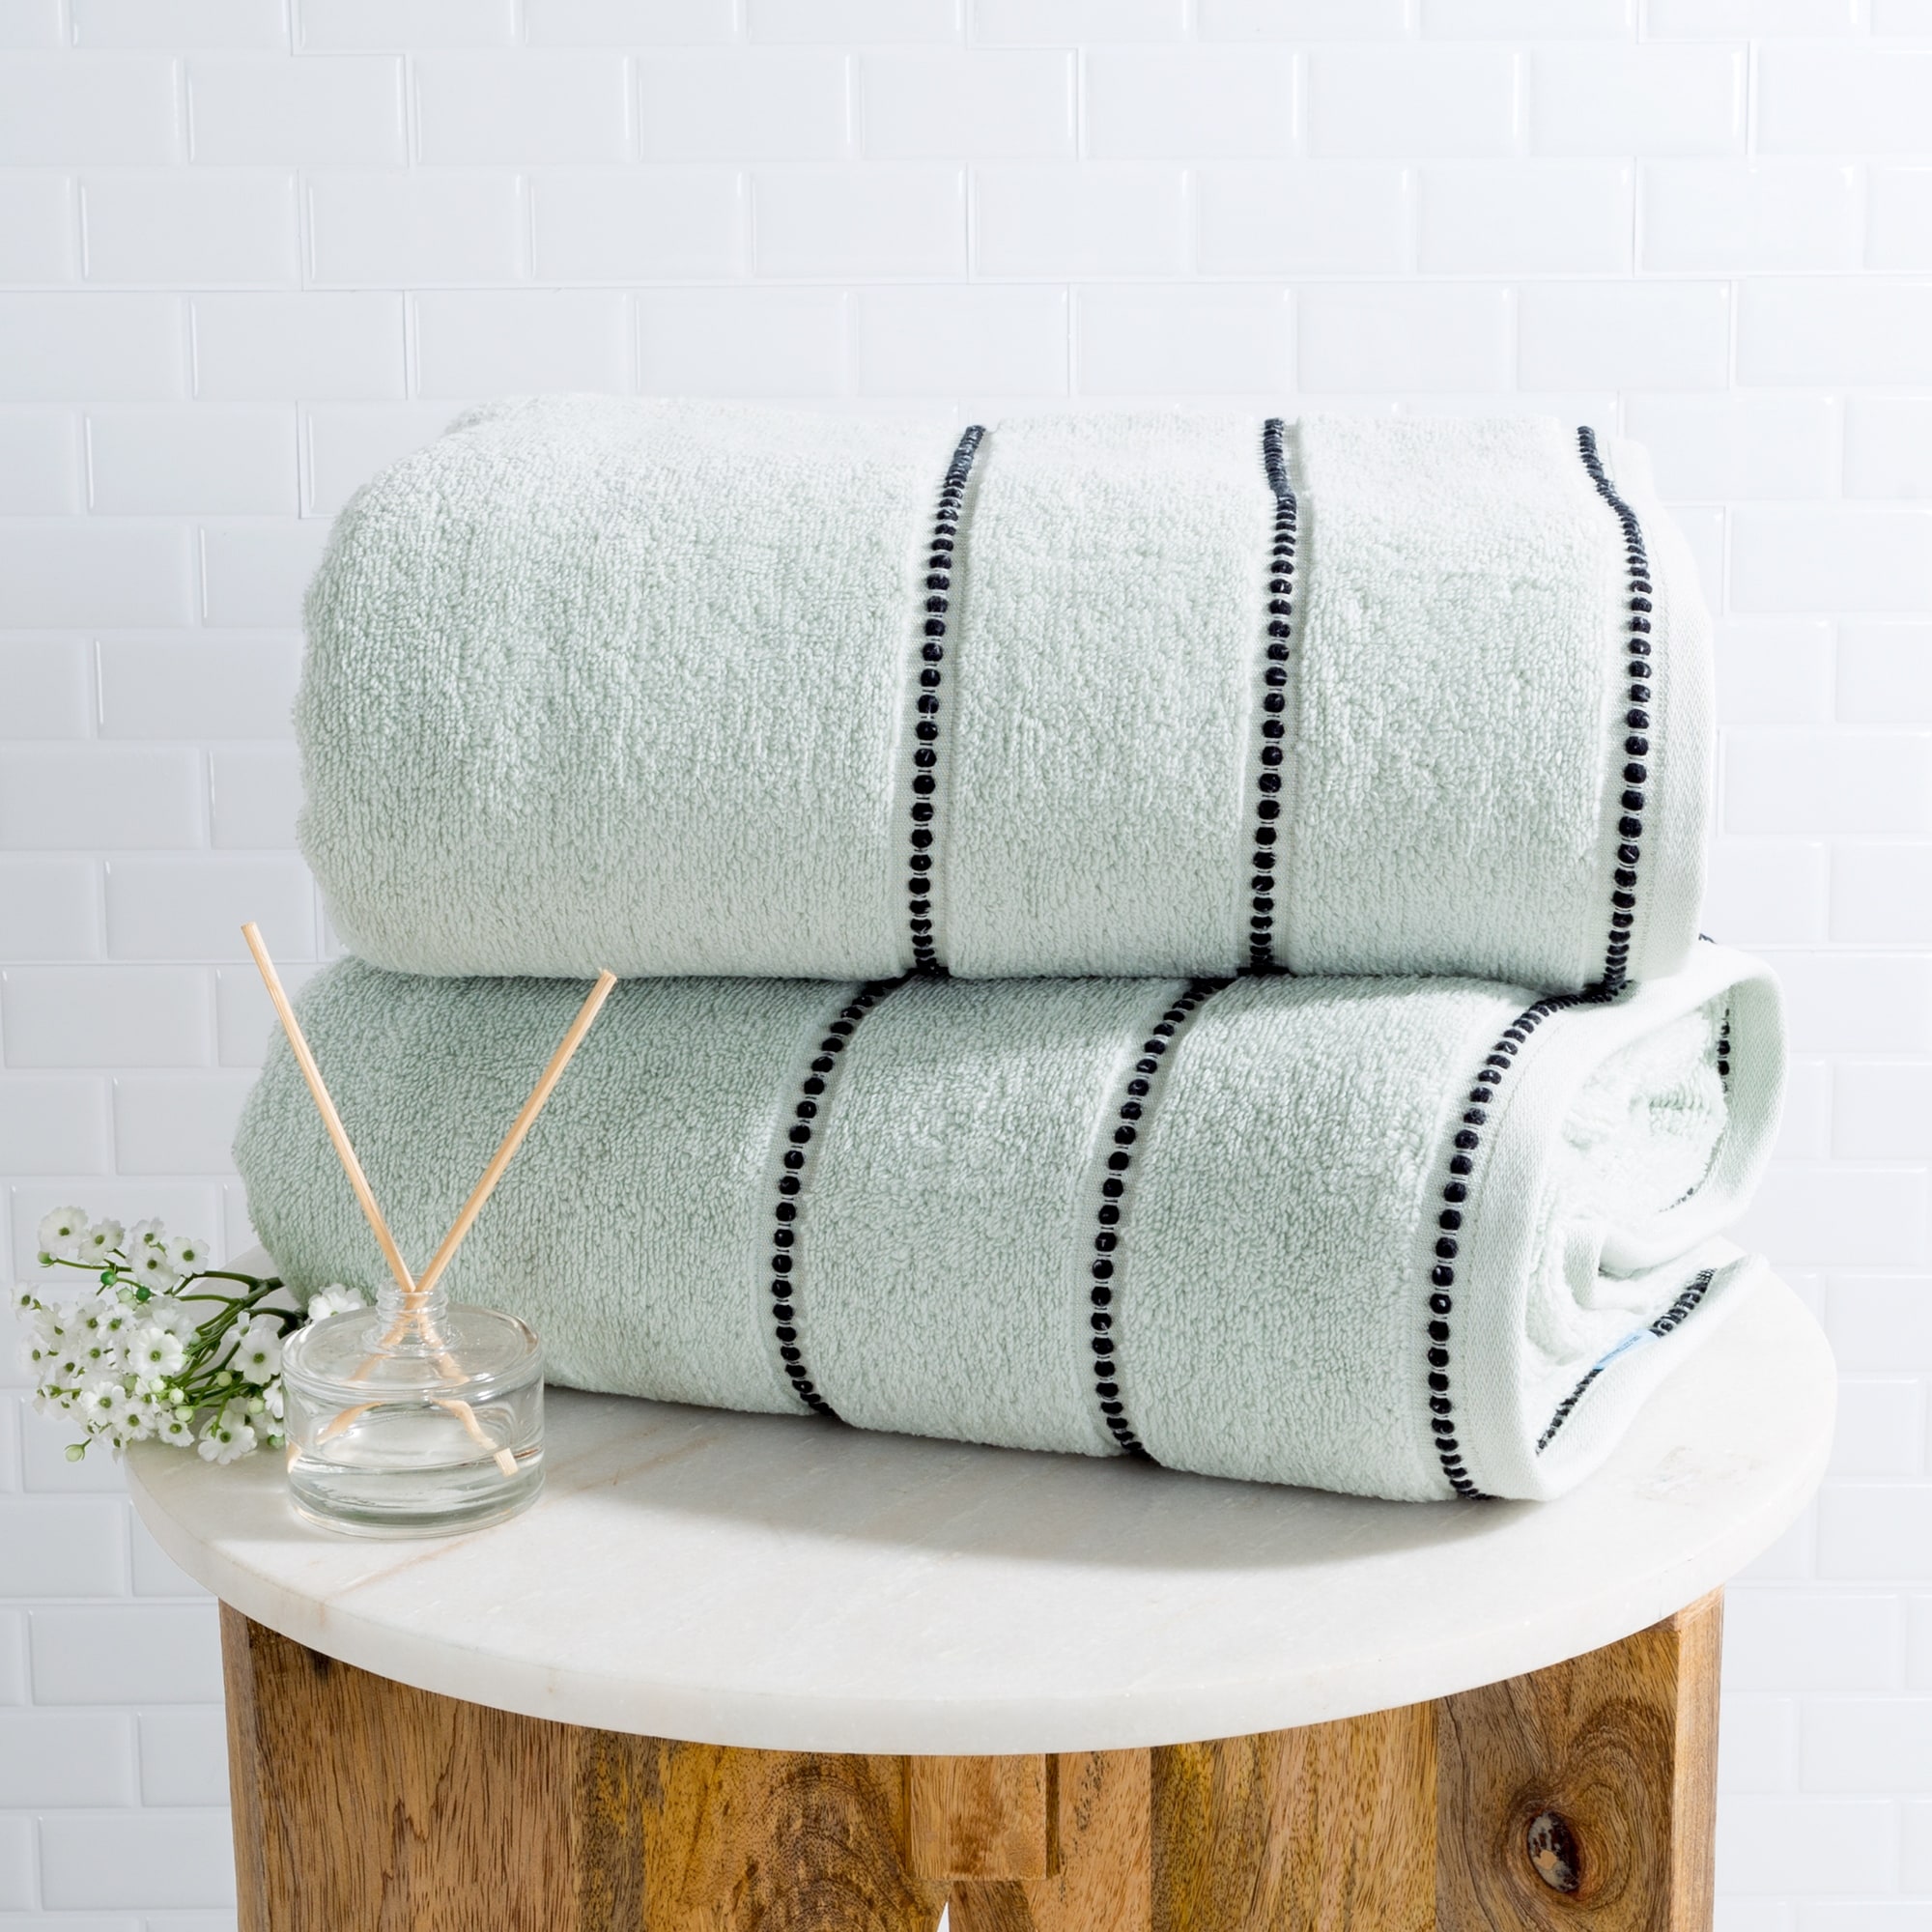 https://ak1.ostkcdn.com/images/products/is/images/direct/773d145e300a7638a7c00932371b9609704b2670/2-Piece-Luxury-Bathroom-Towels-Set---Made-From-Washable-100%25-Zero-Twist-Cotton-by-Lavish-Home-%28Seafoam%29.jpg